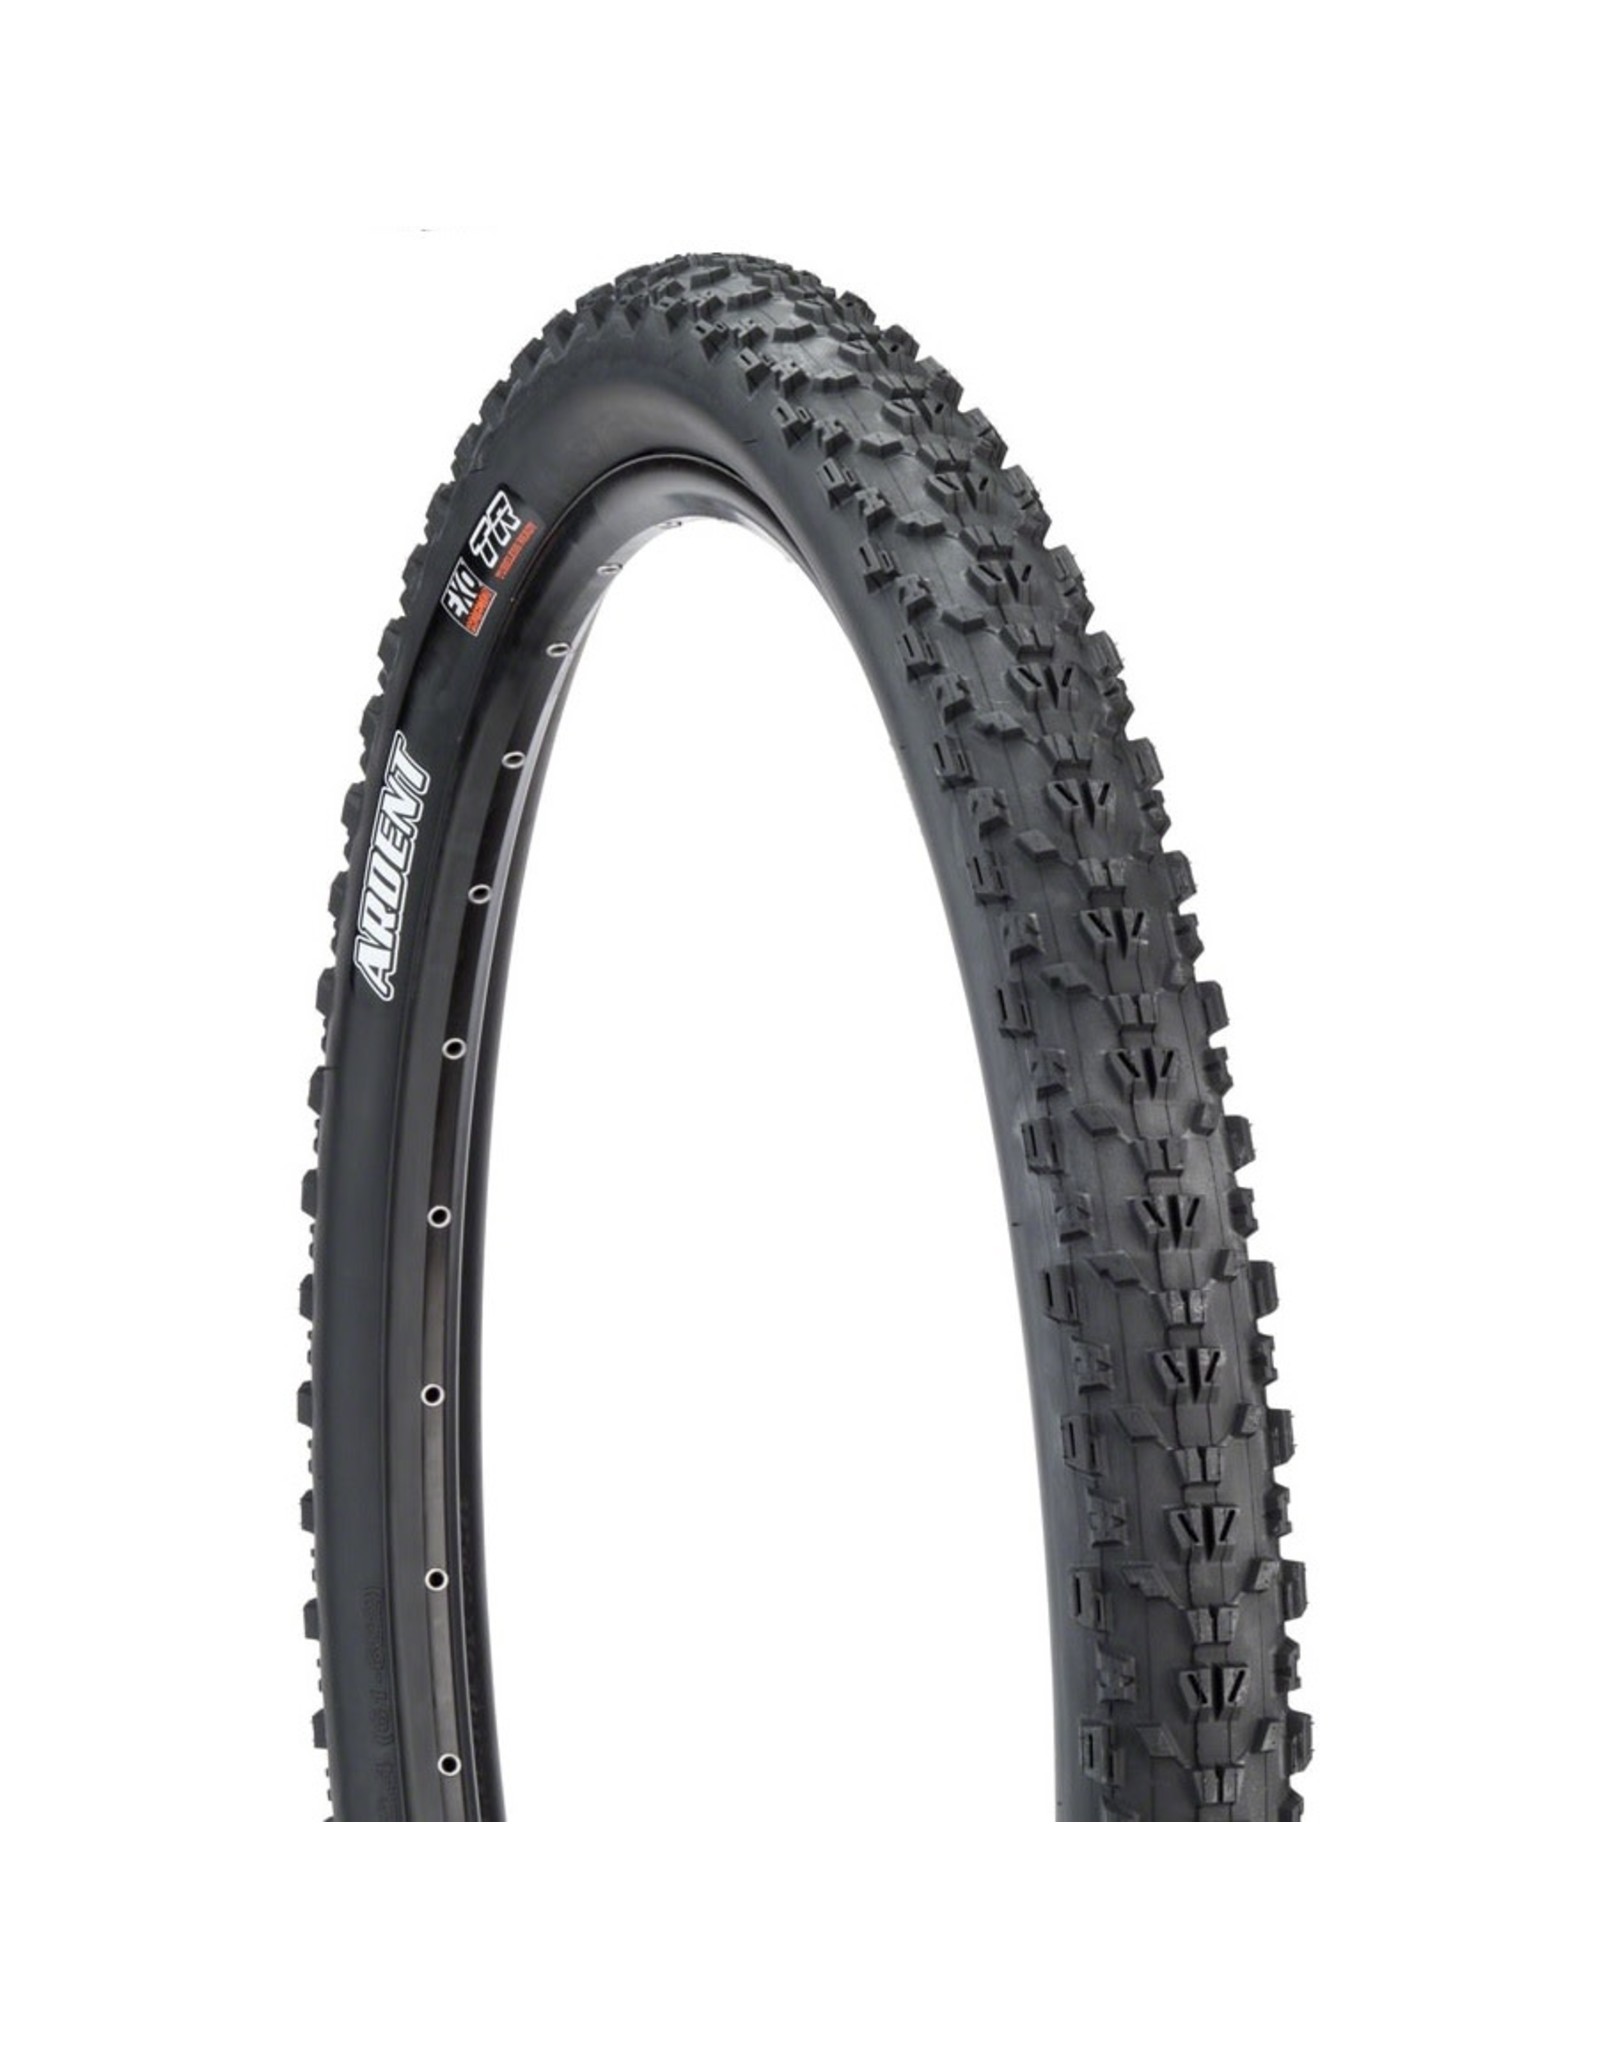 maxxis 27.5 tires